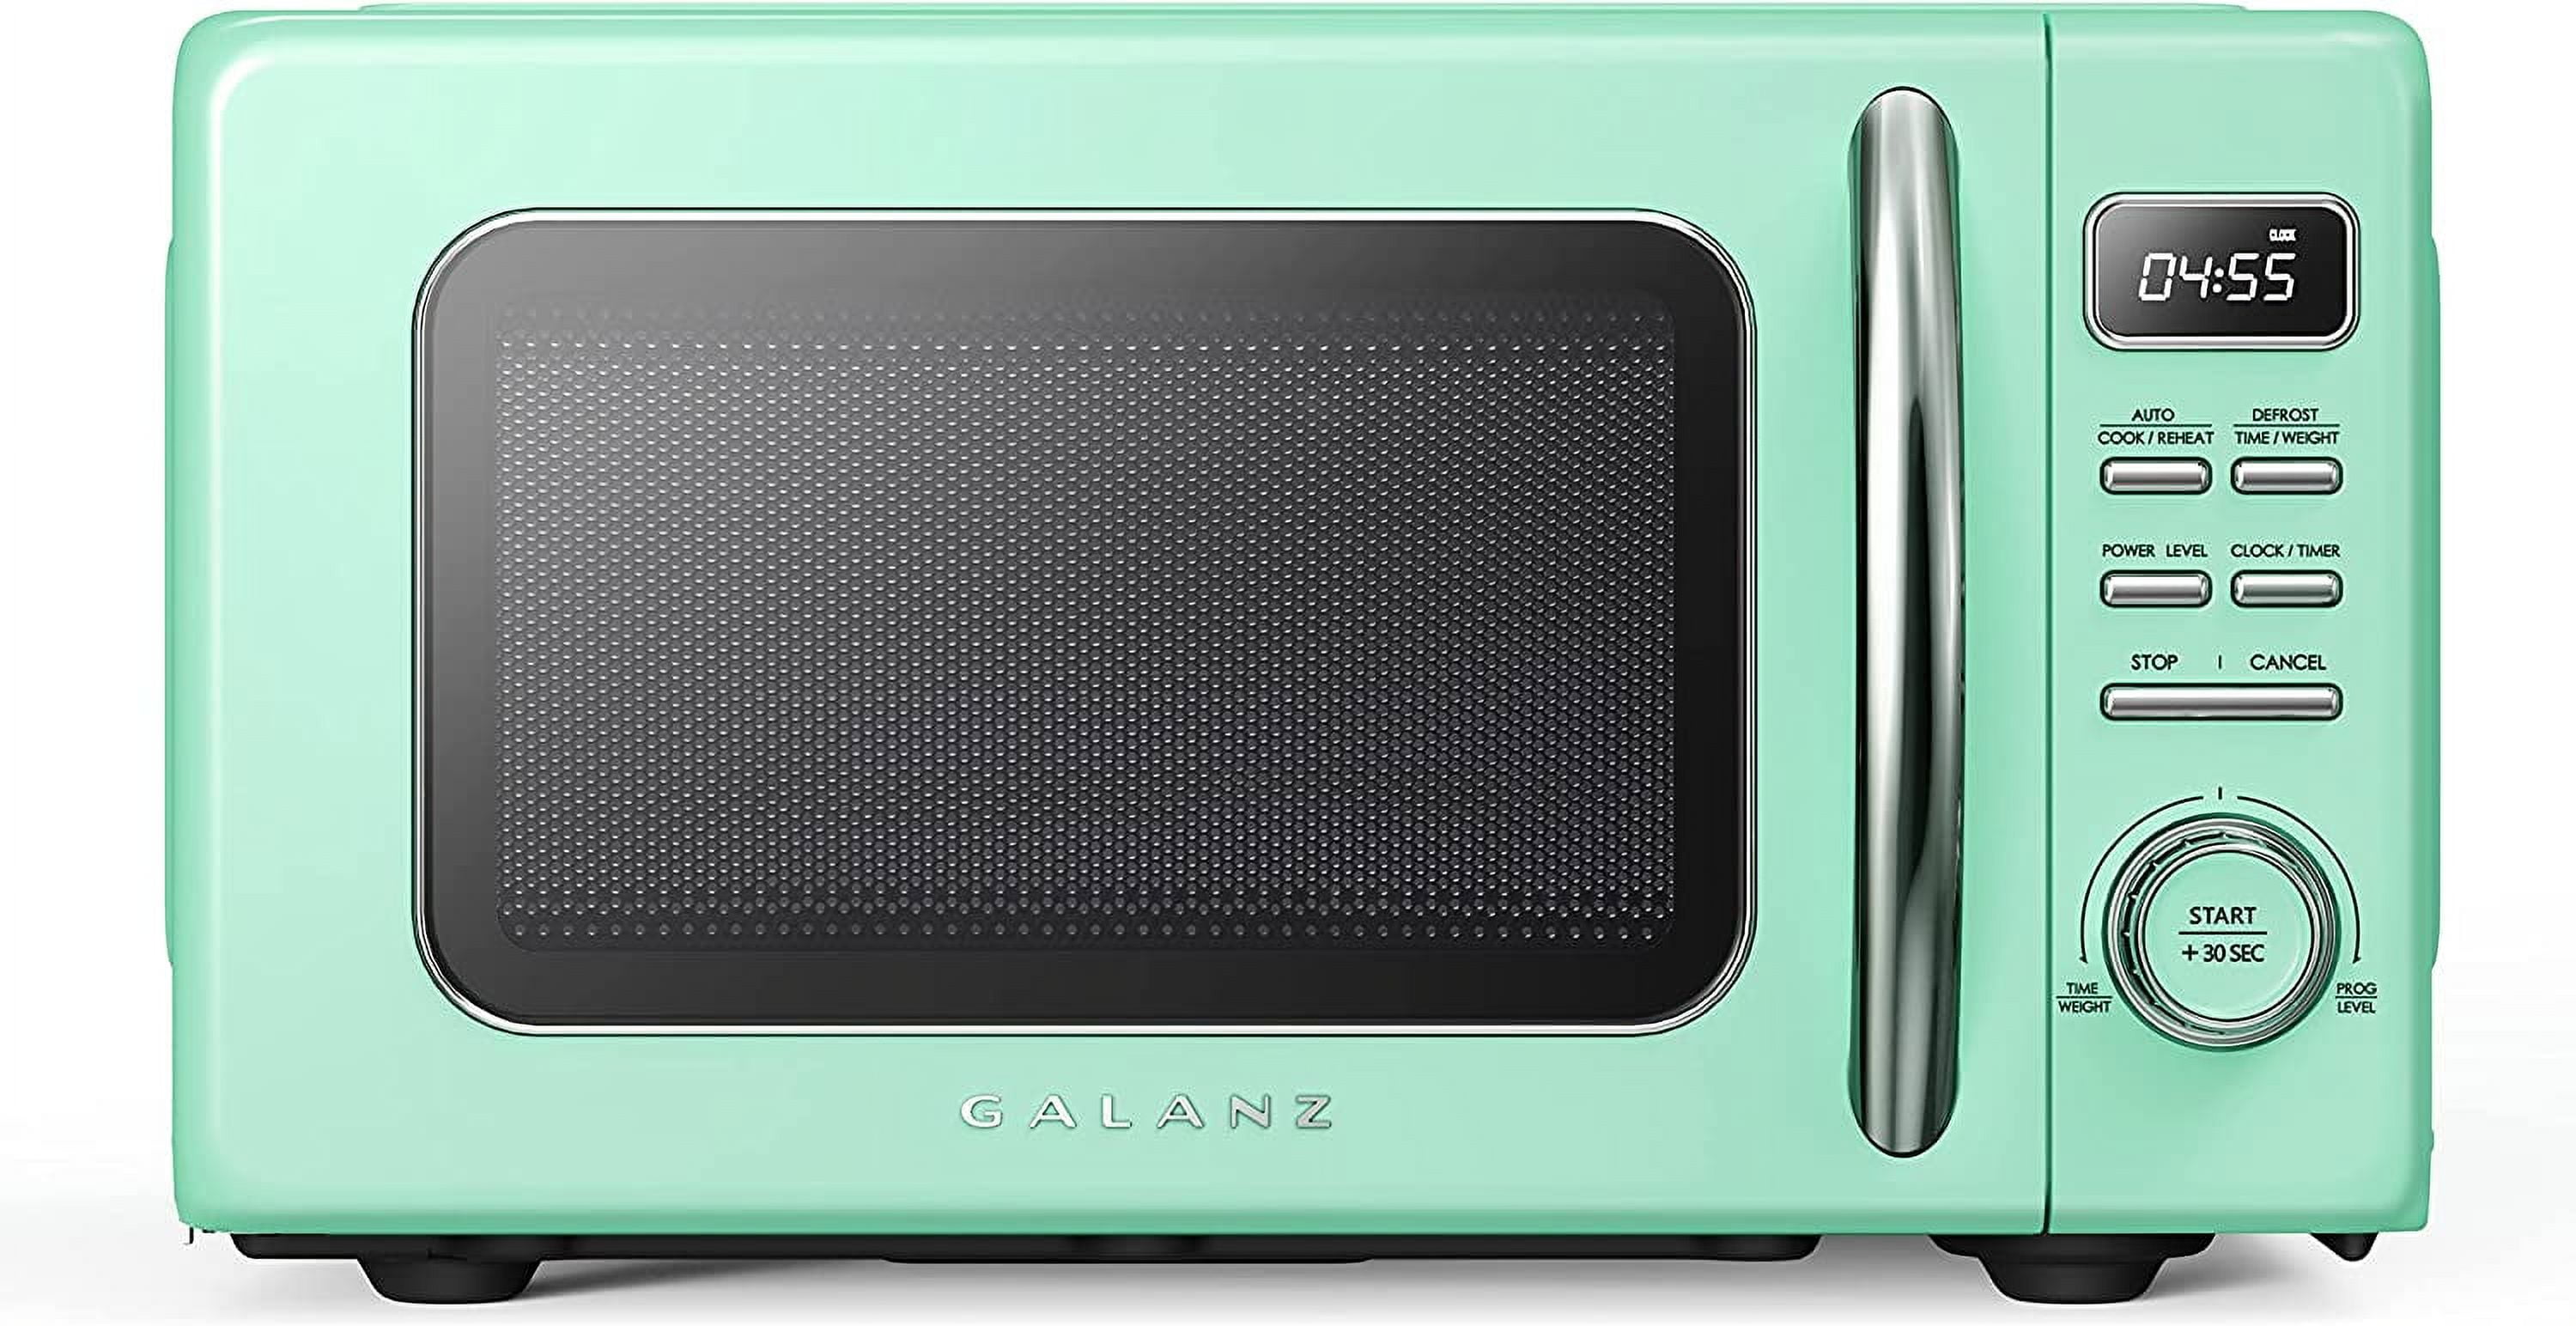 Galanz Retro Countertop Microwave Oven with Auto Cook & Reheat, Defrost,  Quick Start Functions, Easy Clean with Glass Turntable, Pull Handle, 1.1 cu  ft, Blue 